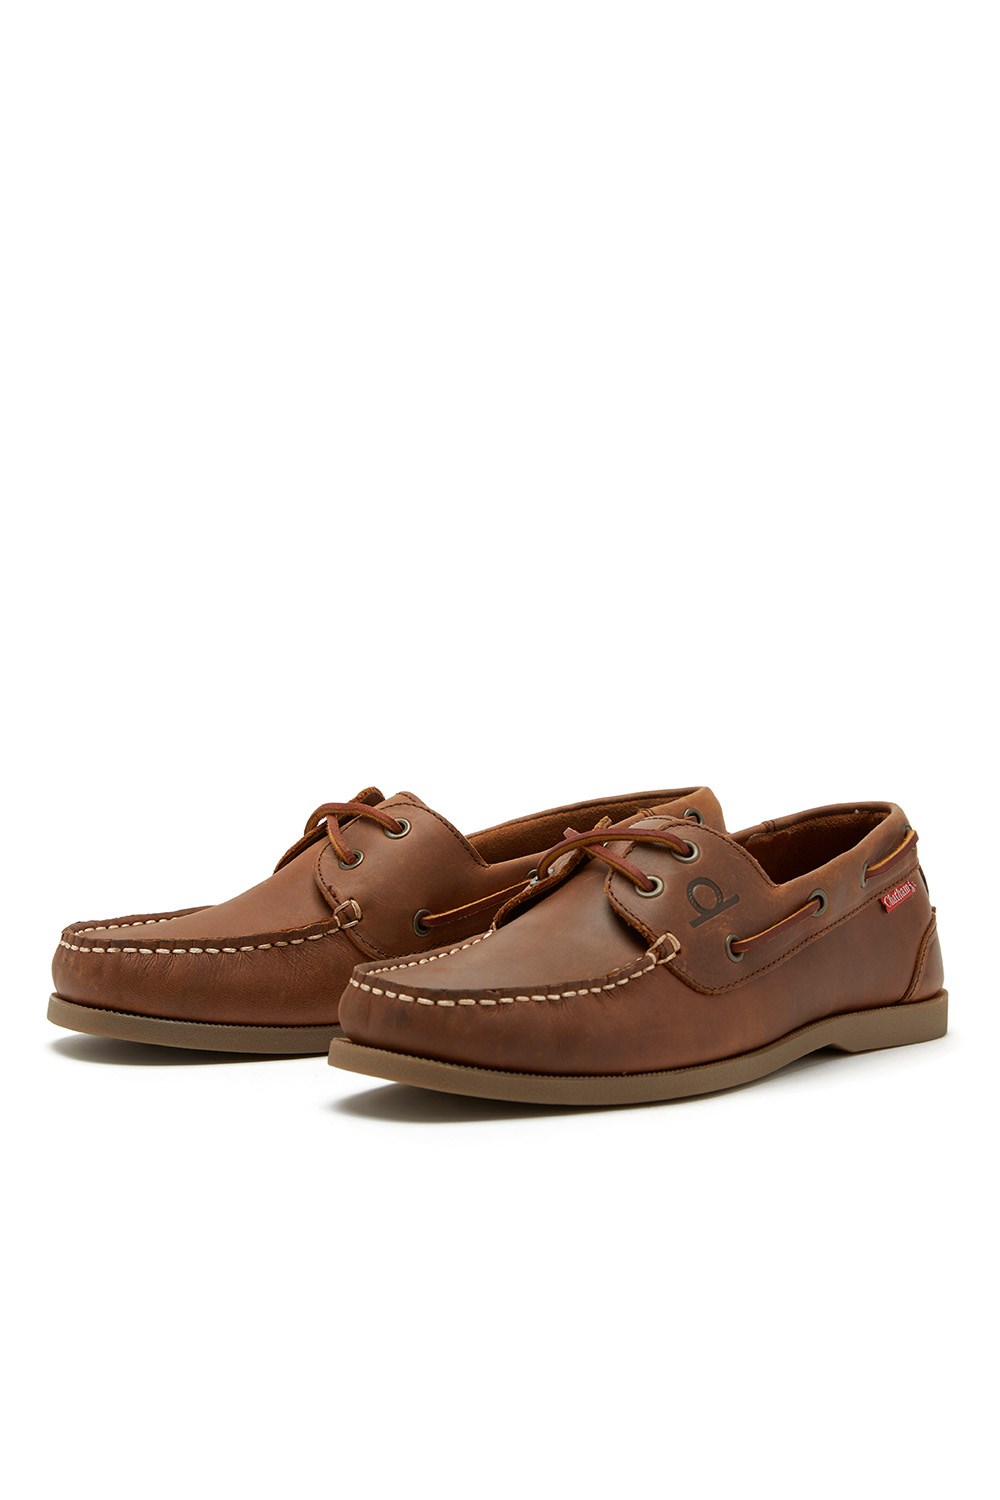 Galley Ii Mens Leather Boat Shoes -